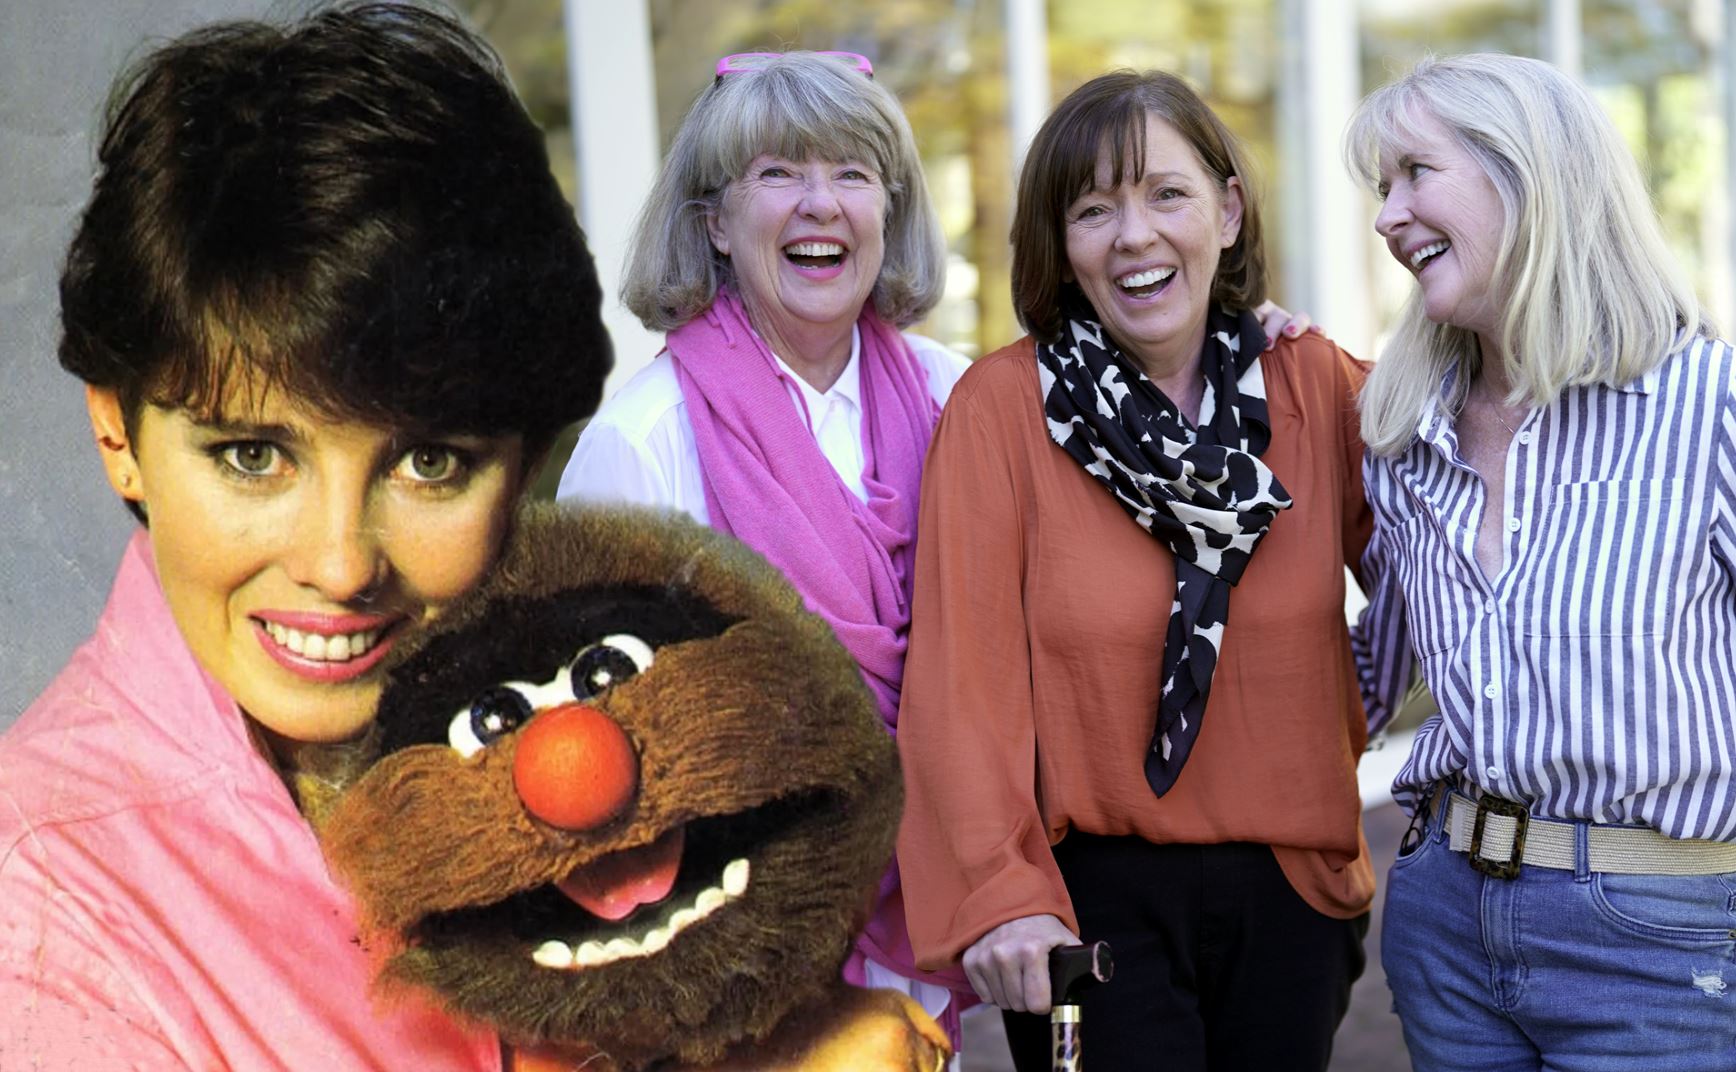 A two-image compilation of three women standing together and laughing, with a young woman hugging a humanoid puppet.